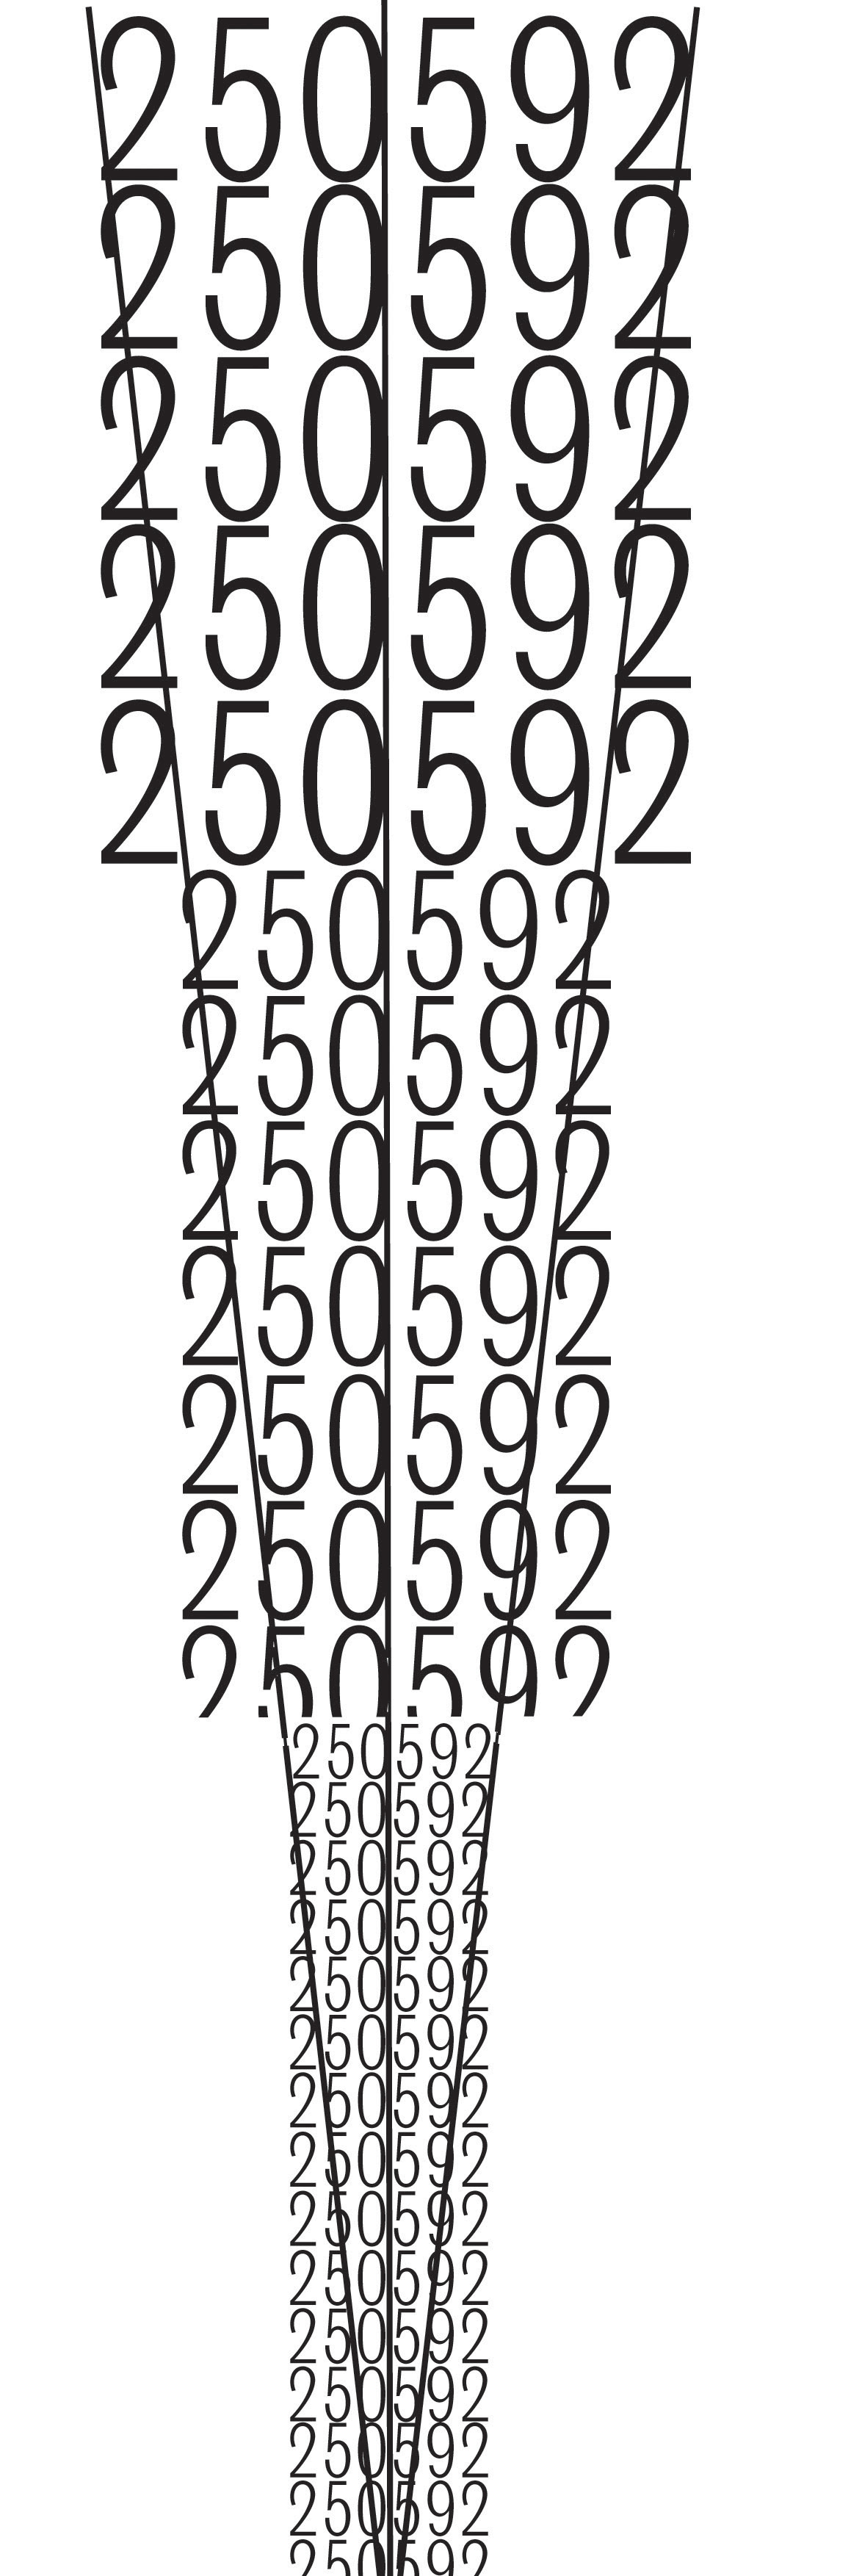 numbers date of birth typography   colour black & white